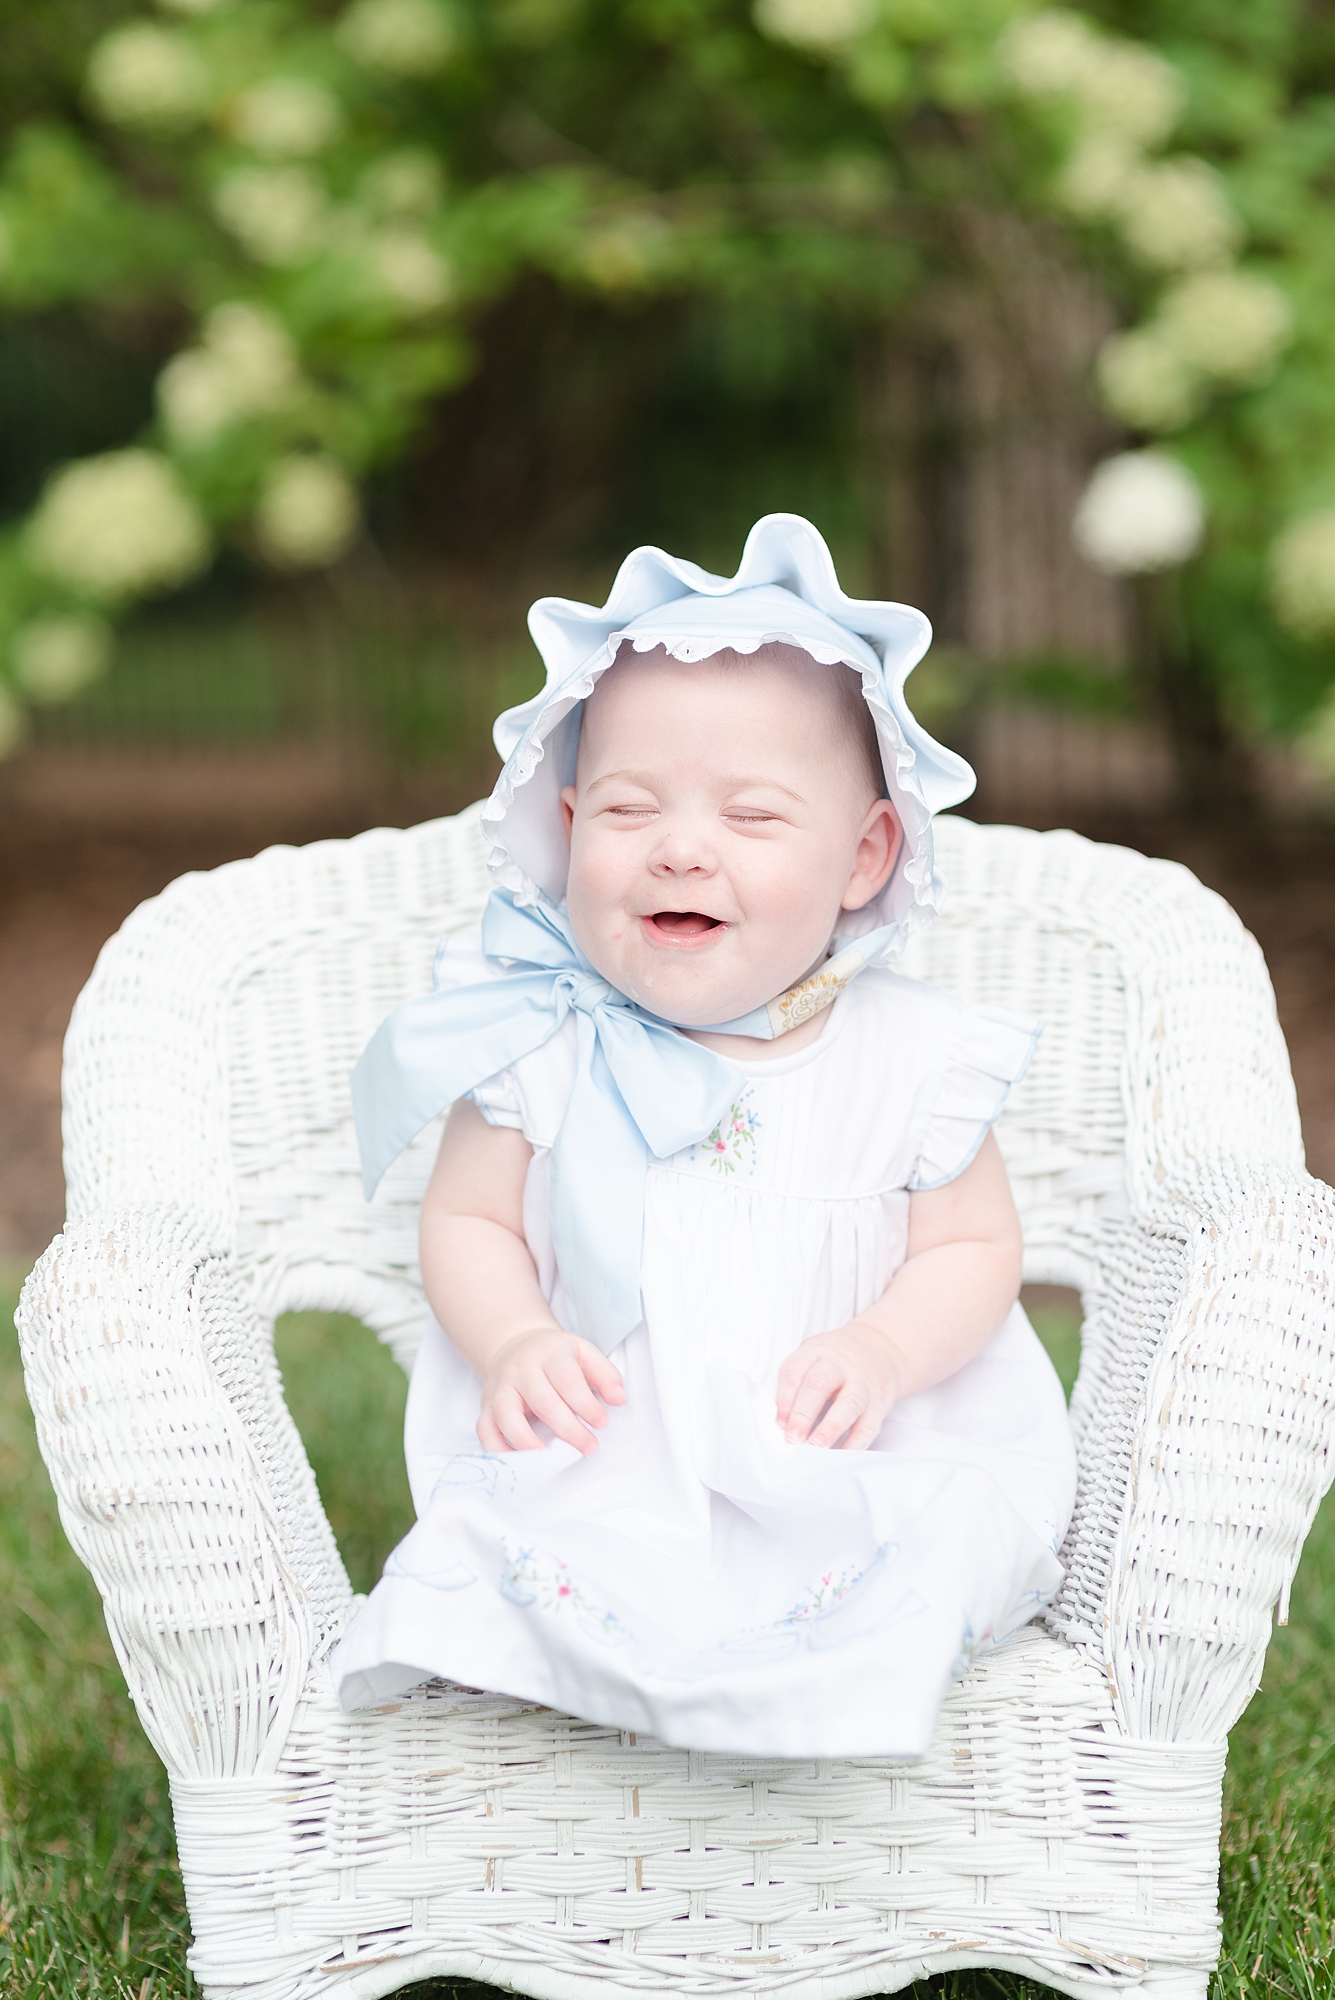 Baby girl wearing a blue bonnet is taking her 6 month portraits and is sitting on a white whicker chair against a floral backdrop in her grandparents backyard